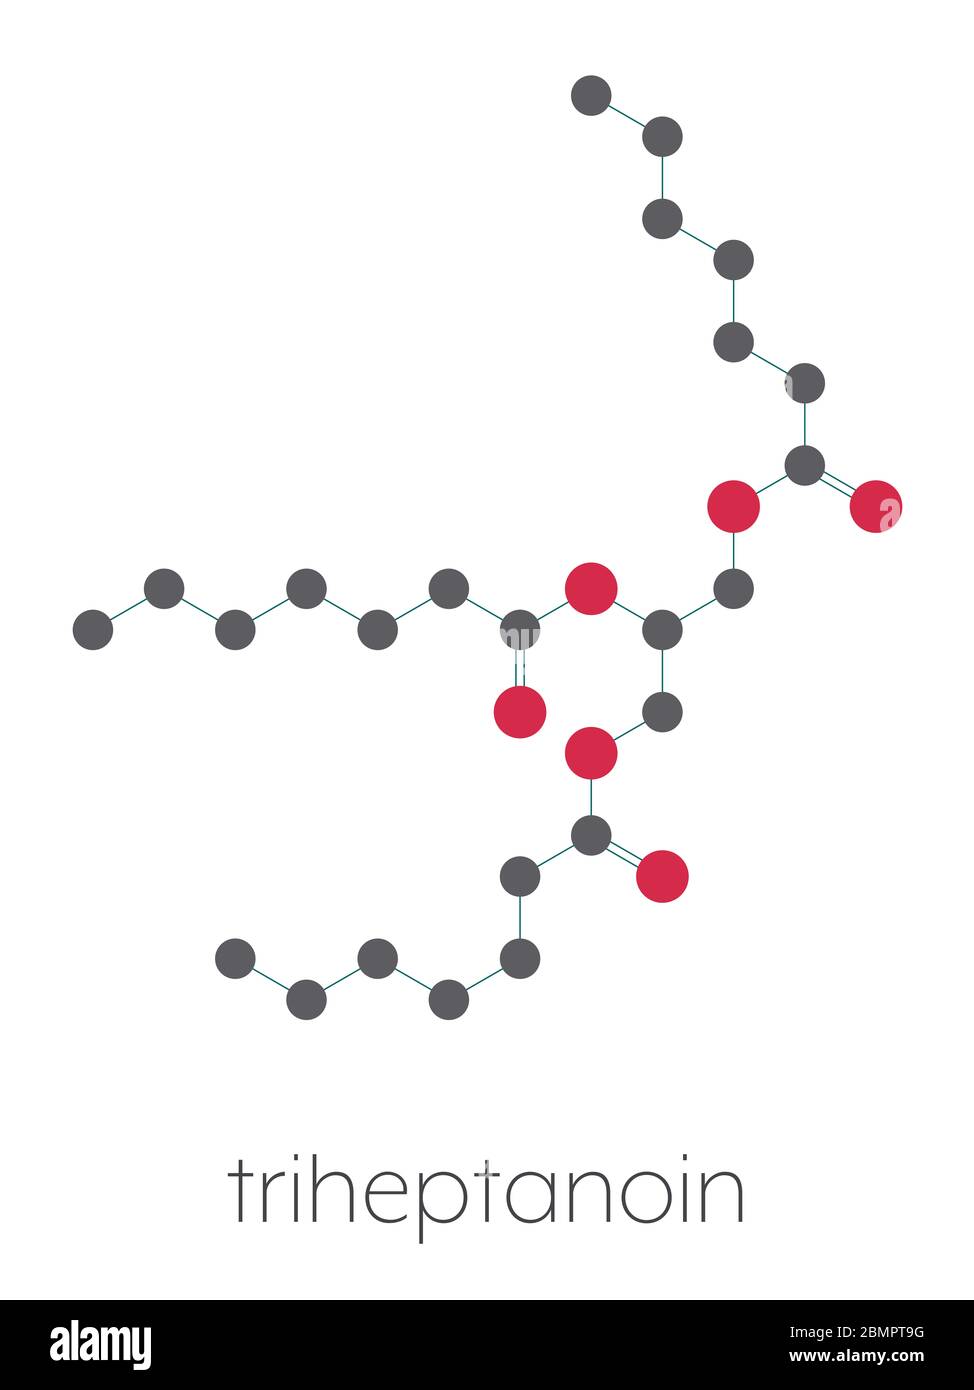 Triheptanoin drug molecule. Stylized skeletal formula (chemical structure): Atoms are shown as color-coded circles: hydrogen (hidden), carbon (grey), oxygen (red). Stock Photo